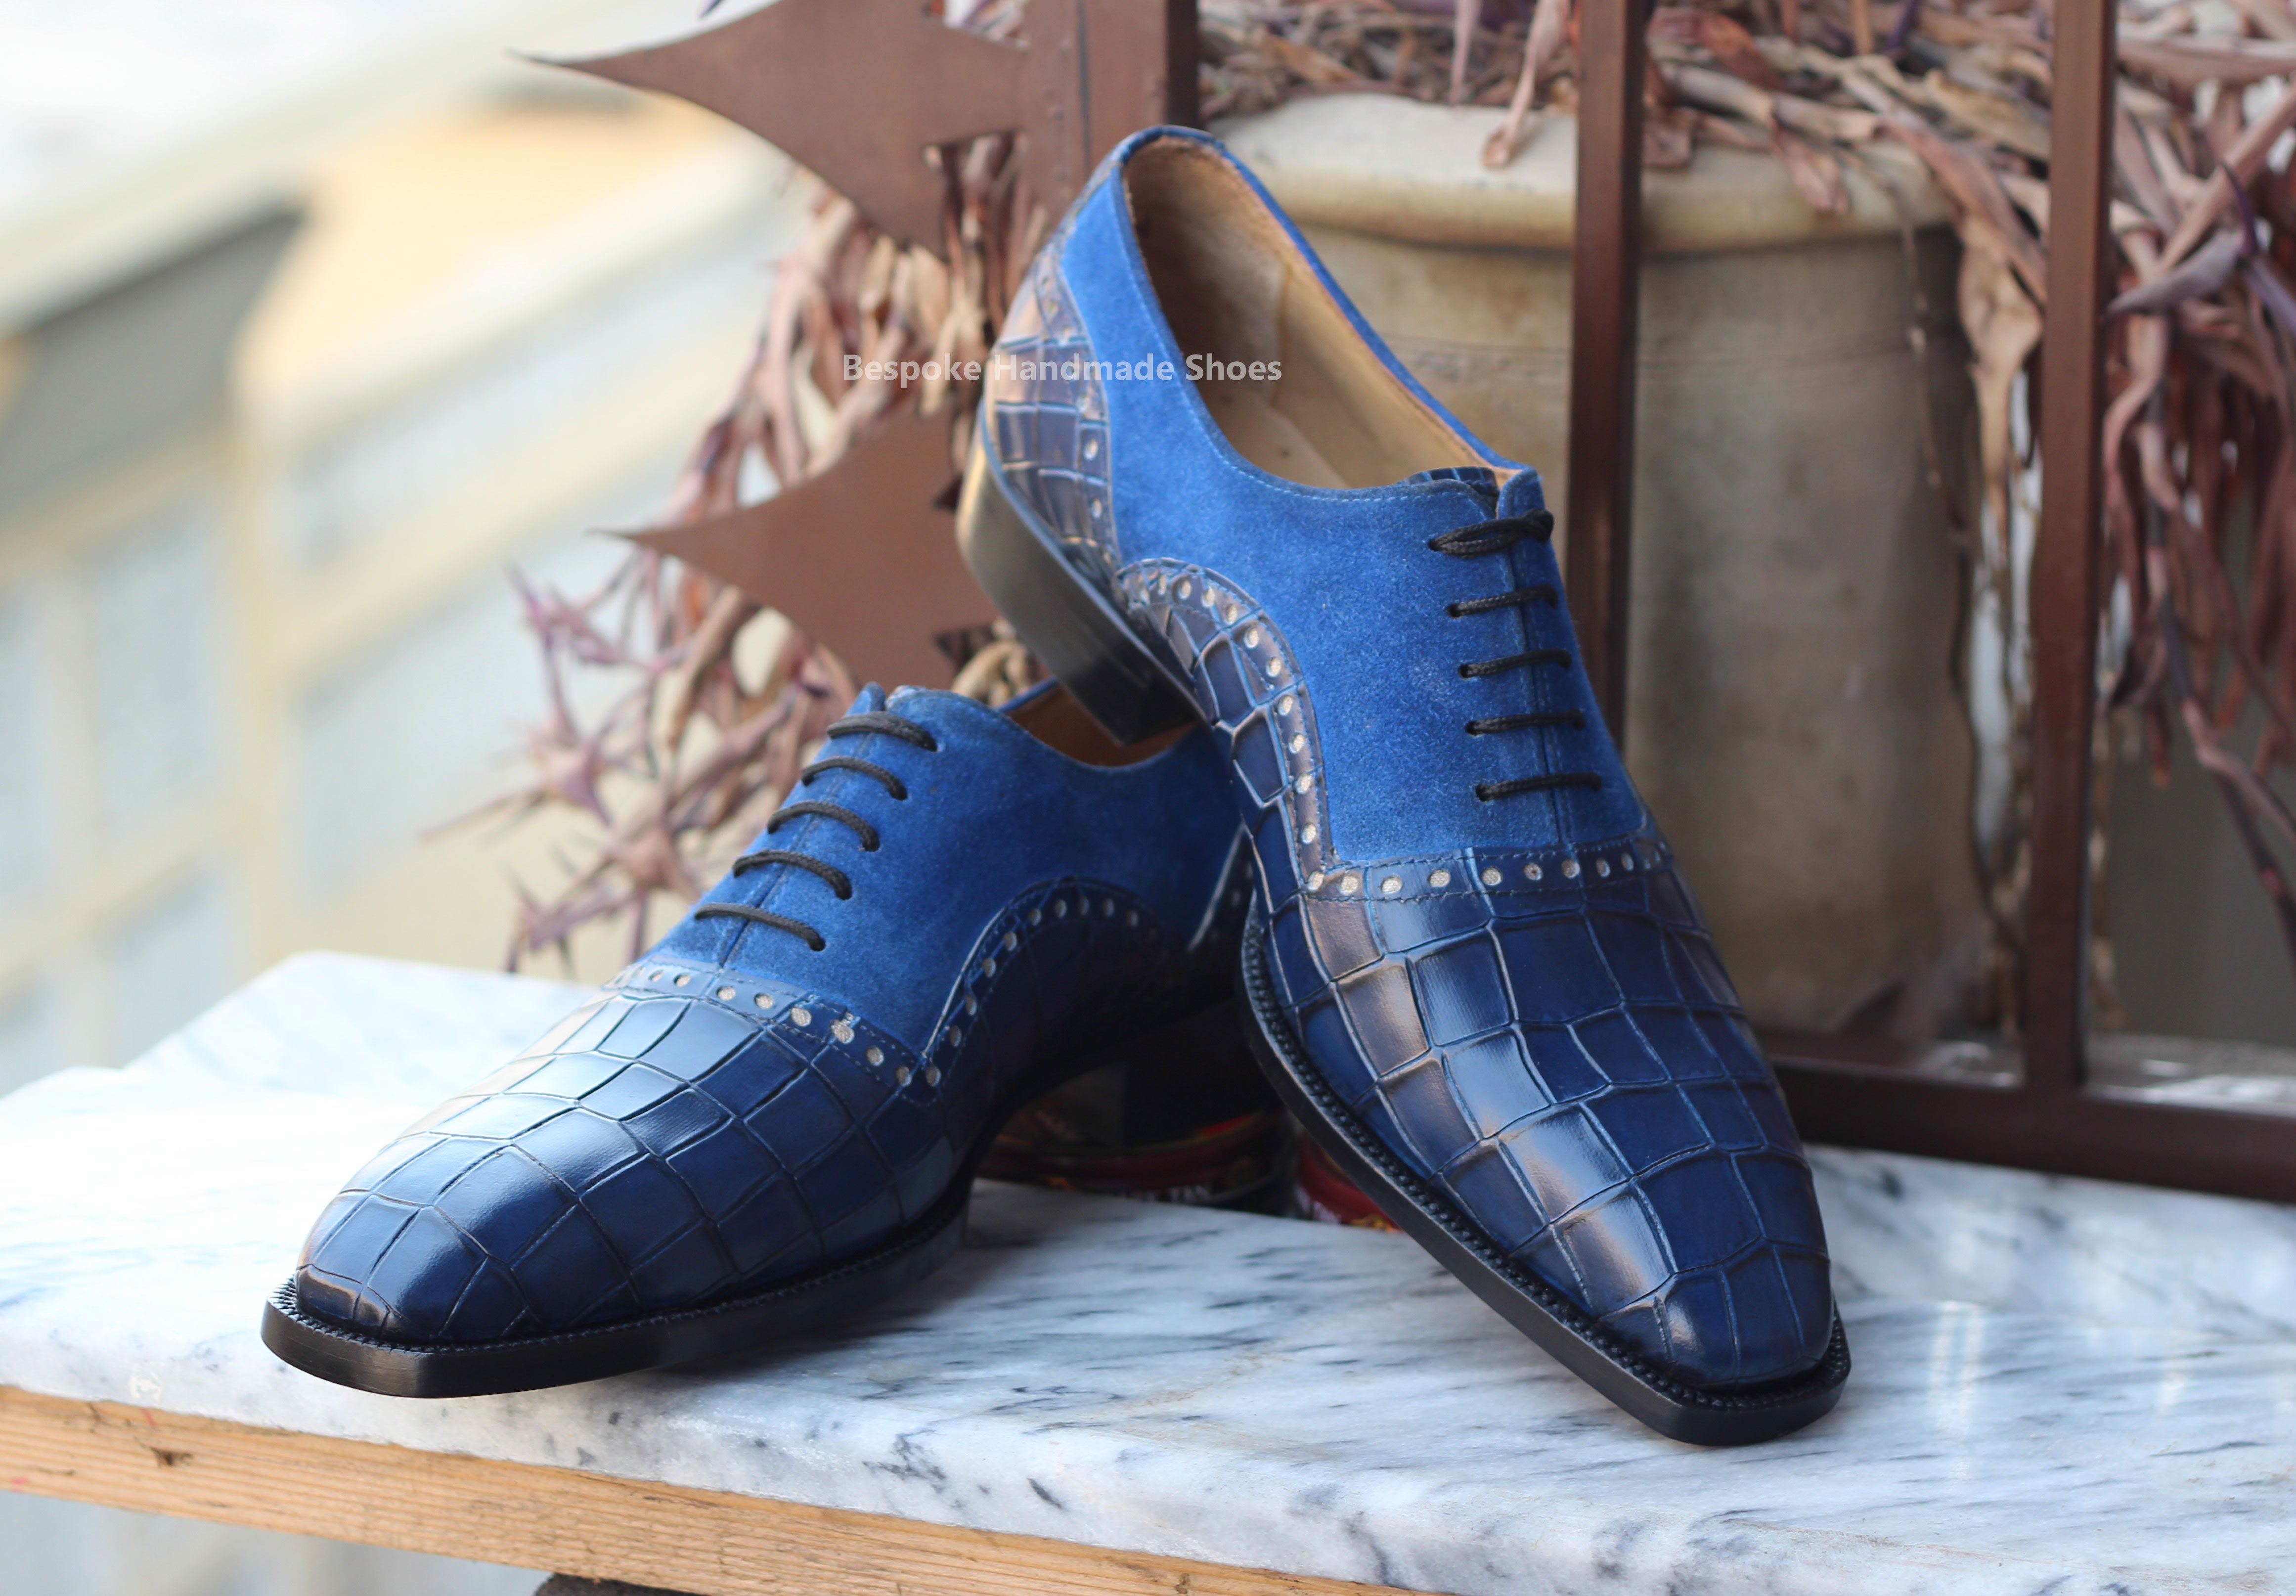 Handcrafted Men's New Genuine Blue Alligator Texture Leather Suede Oxford Lace Up Fashion Shoes